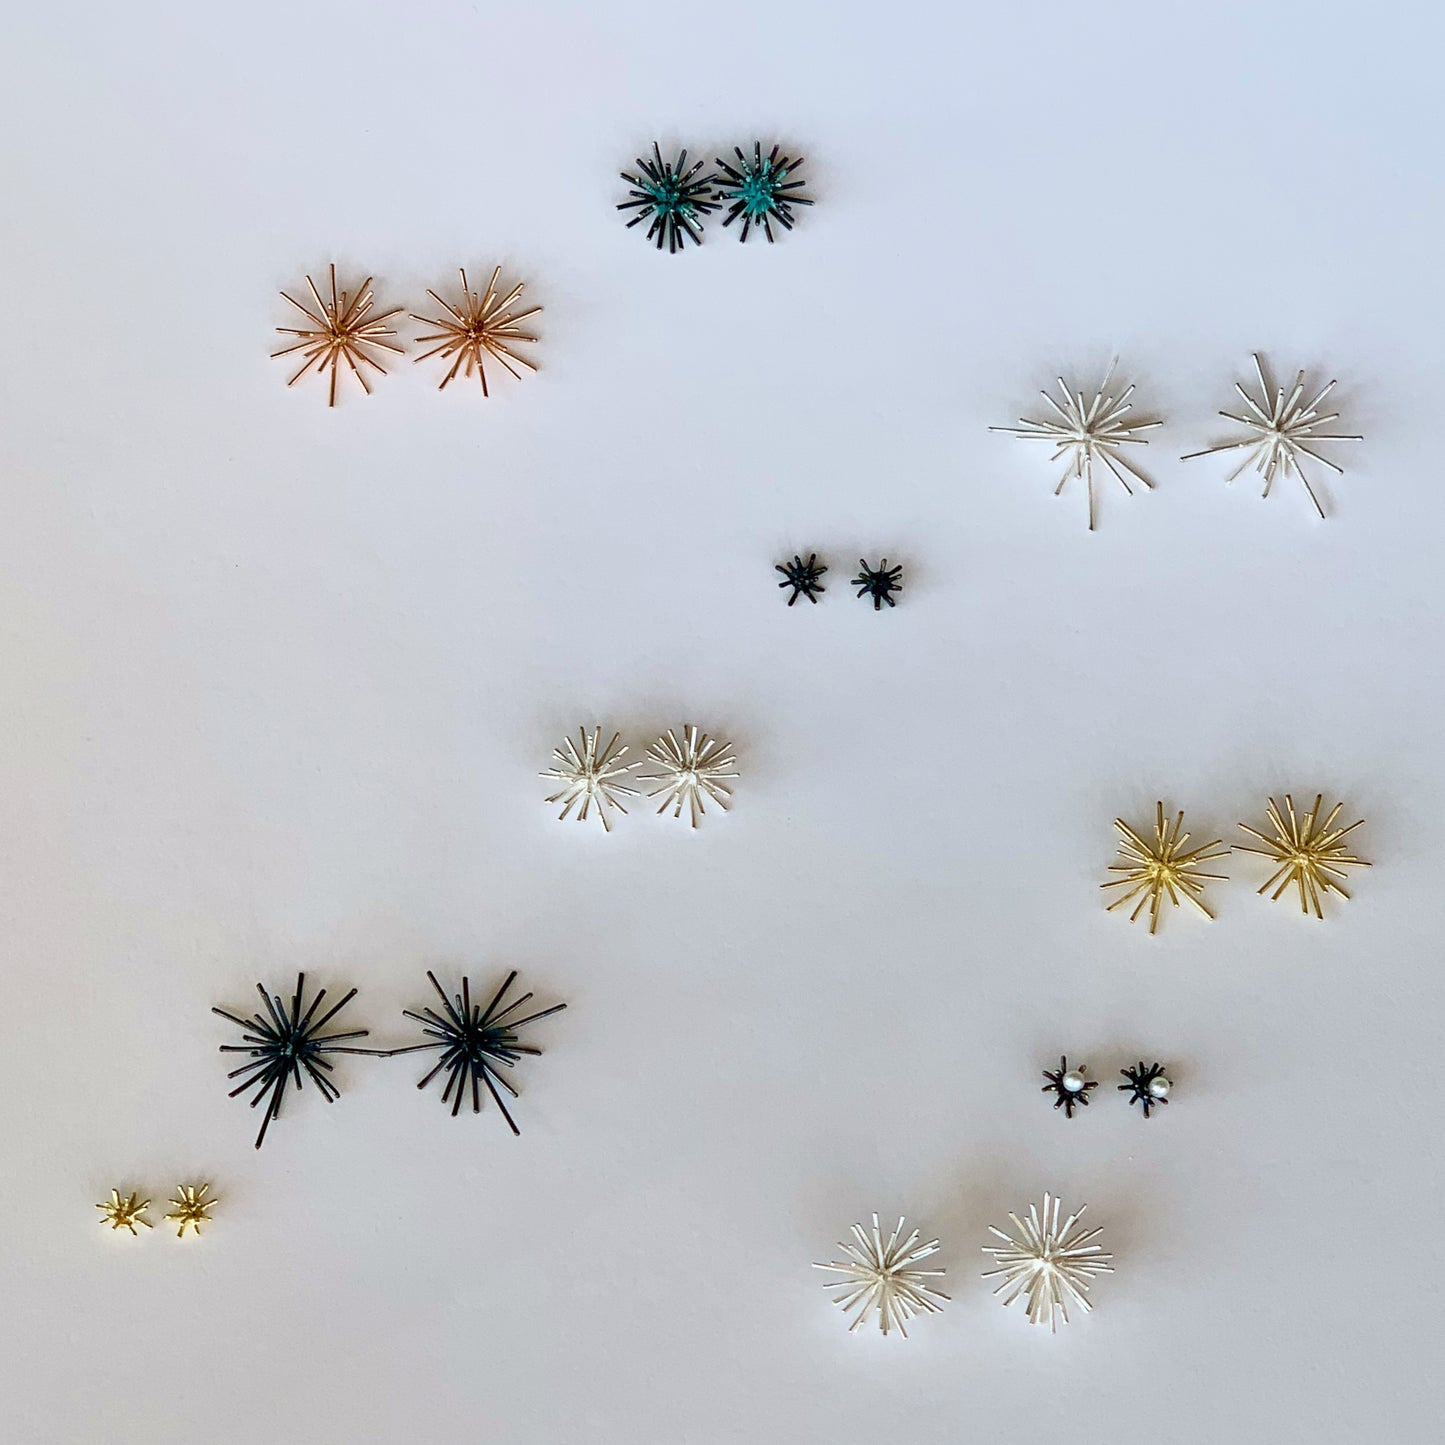 Sea Urchin earrings in solid recycled sterling silver. View the entire collection and choose your favorite pair. These are in the center.